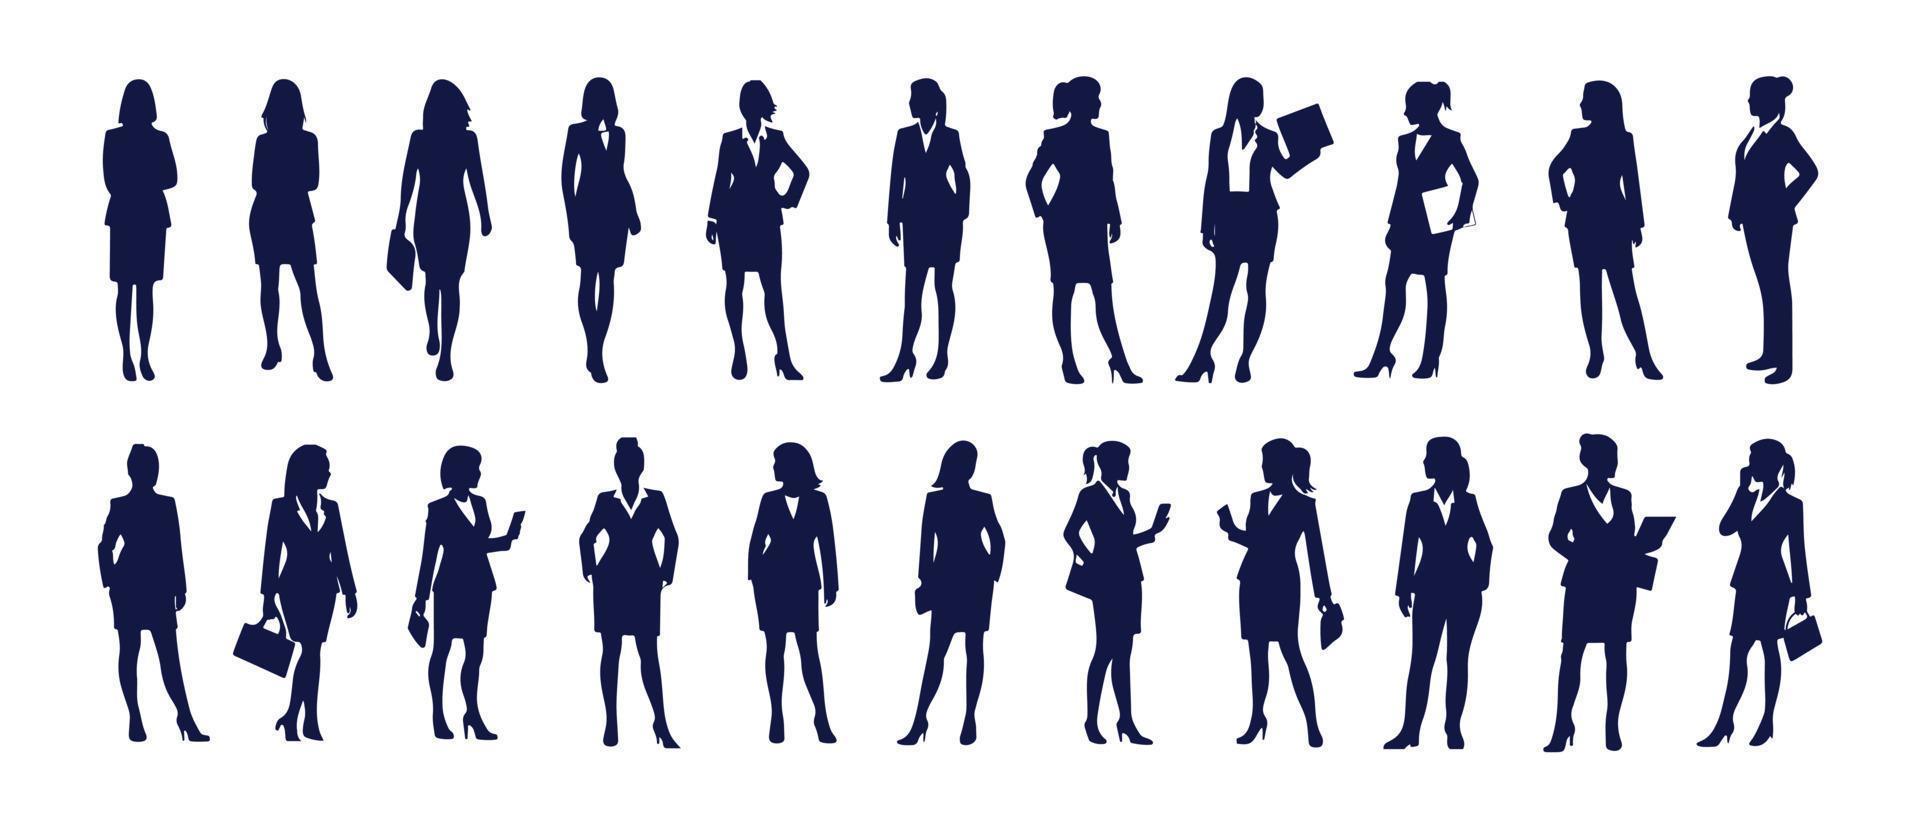 Business people silhouette set business man and woman silhouettes business team meeting background vector illustration